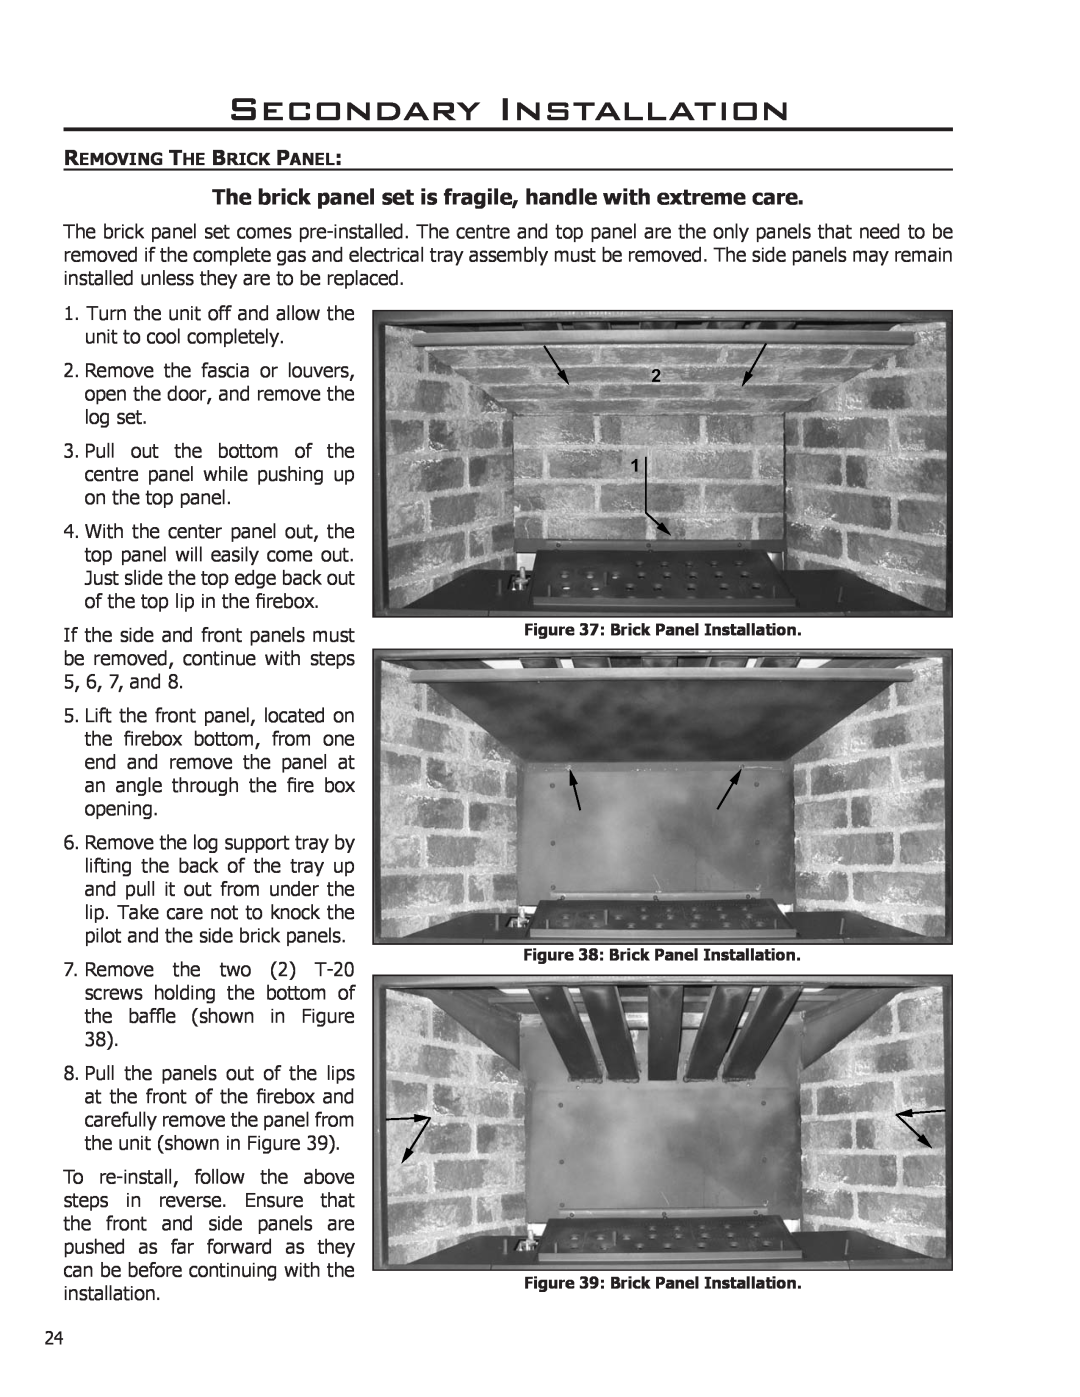 Enviro Indoor Gas Fireplace owner manual Secondary Installation, Removing The Brick Panel, Brick Panel Installation 